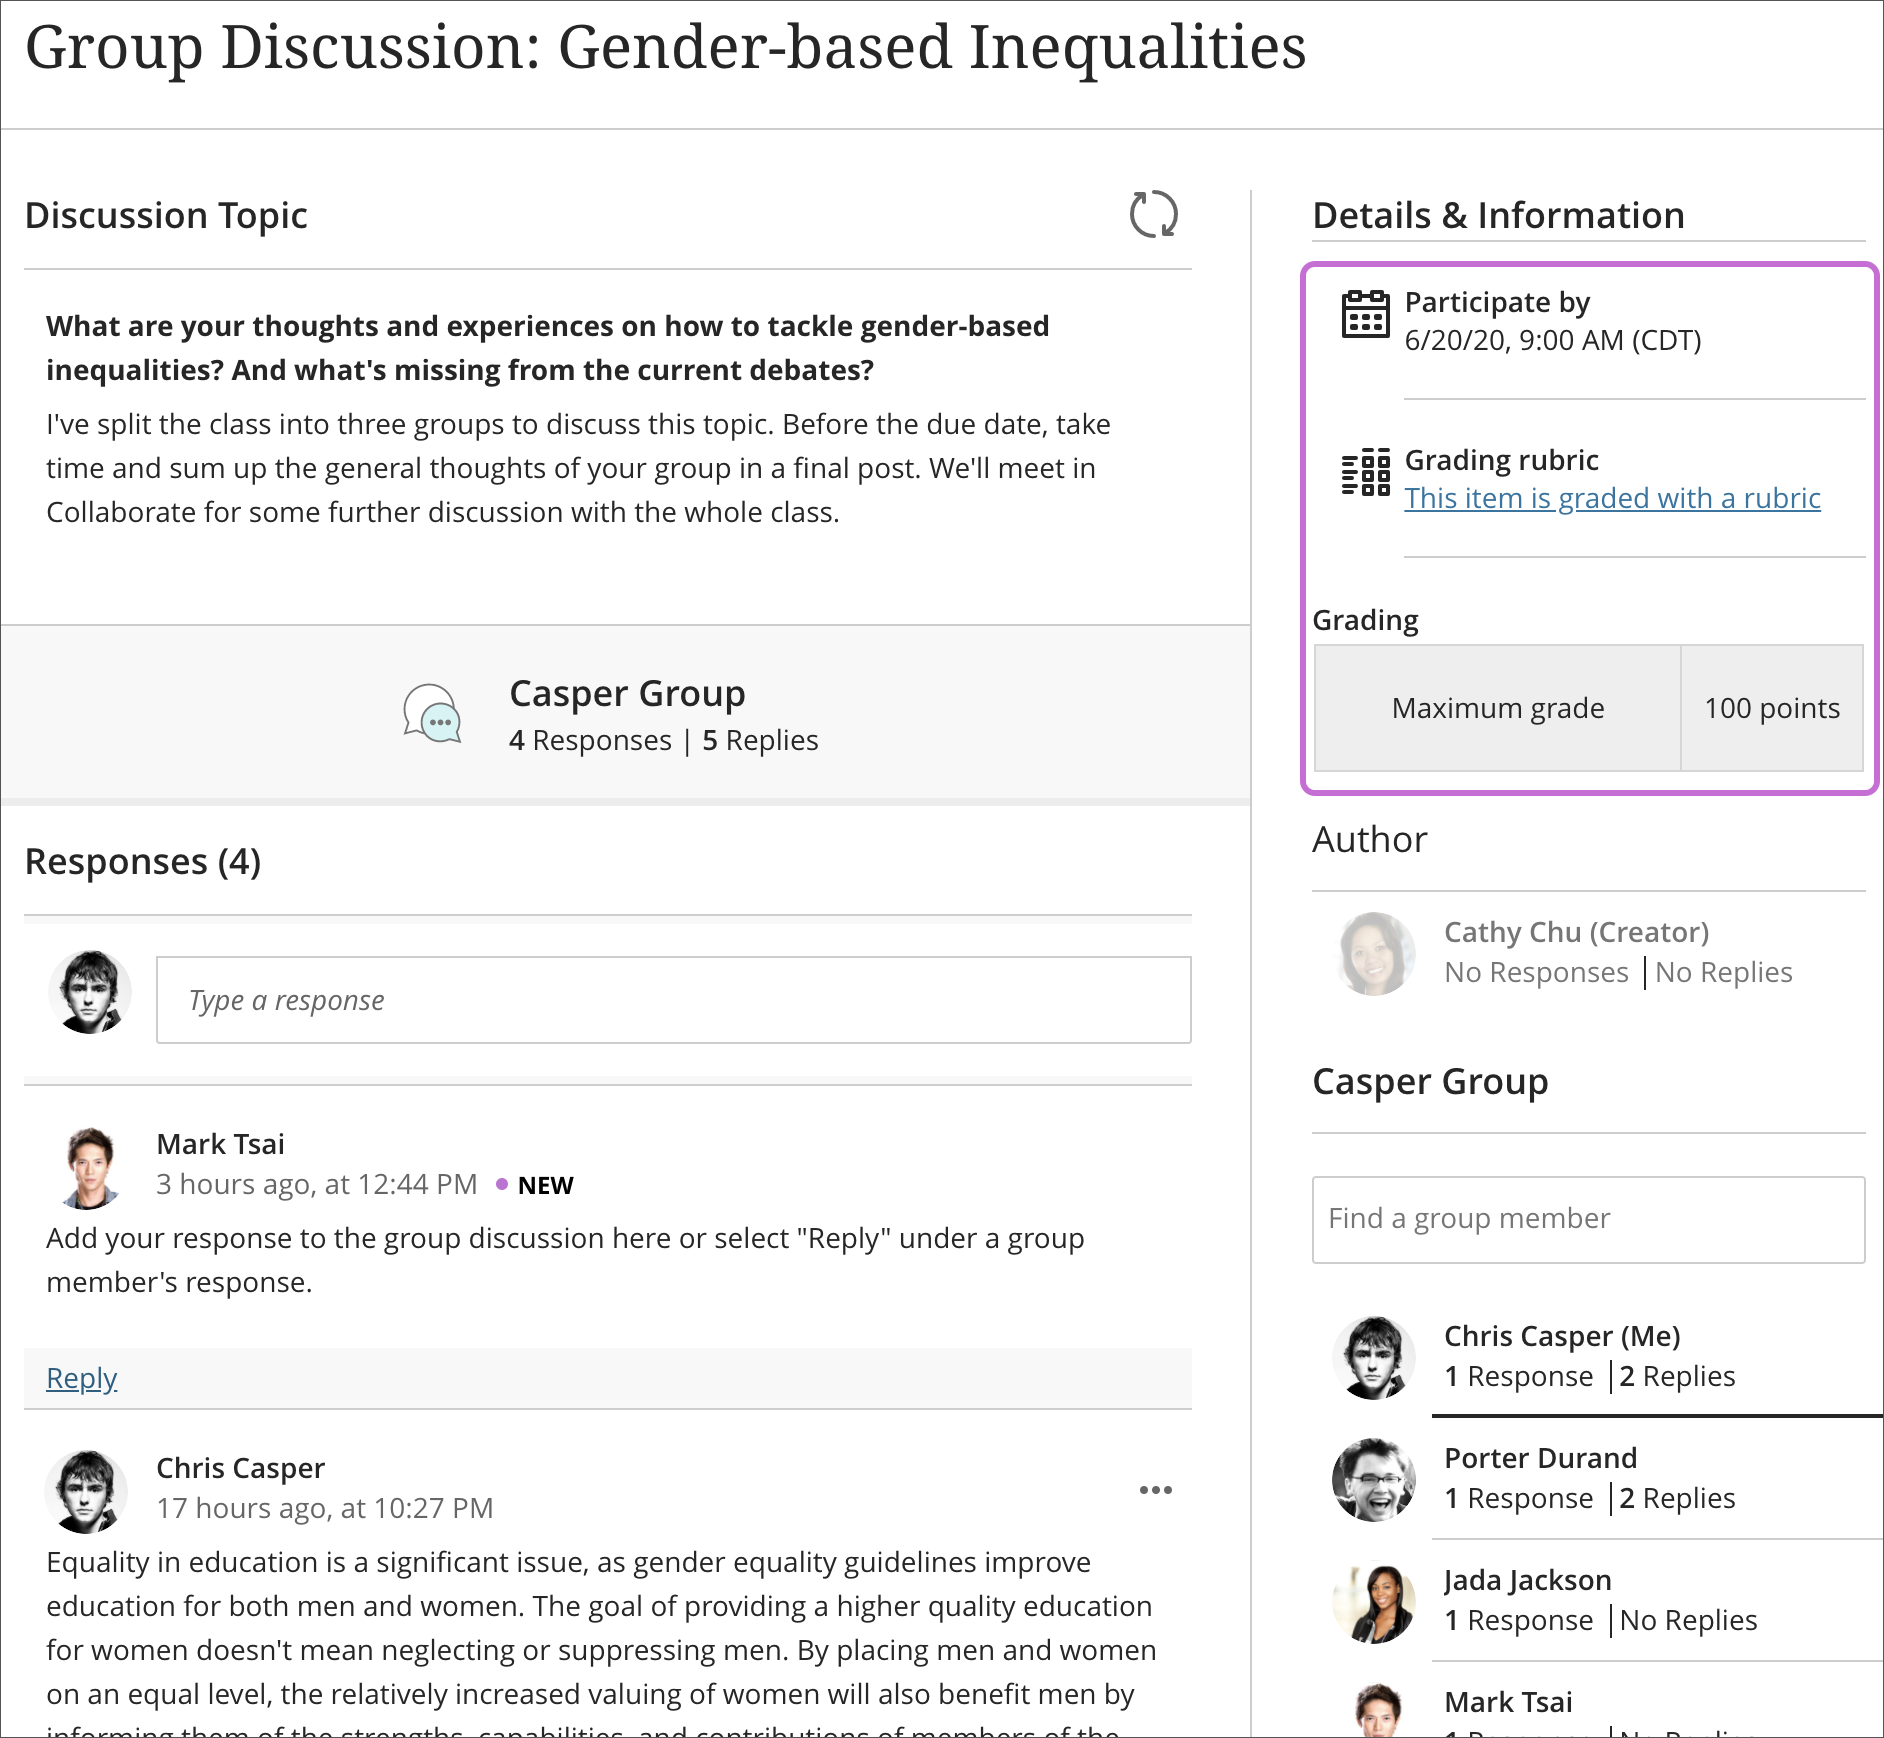 image of Group Discussion page with members posting and replying to the discussion question. A box is highlighting the Details & Information section of the page